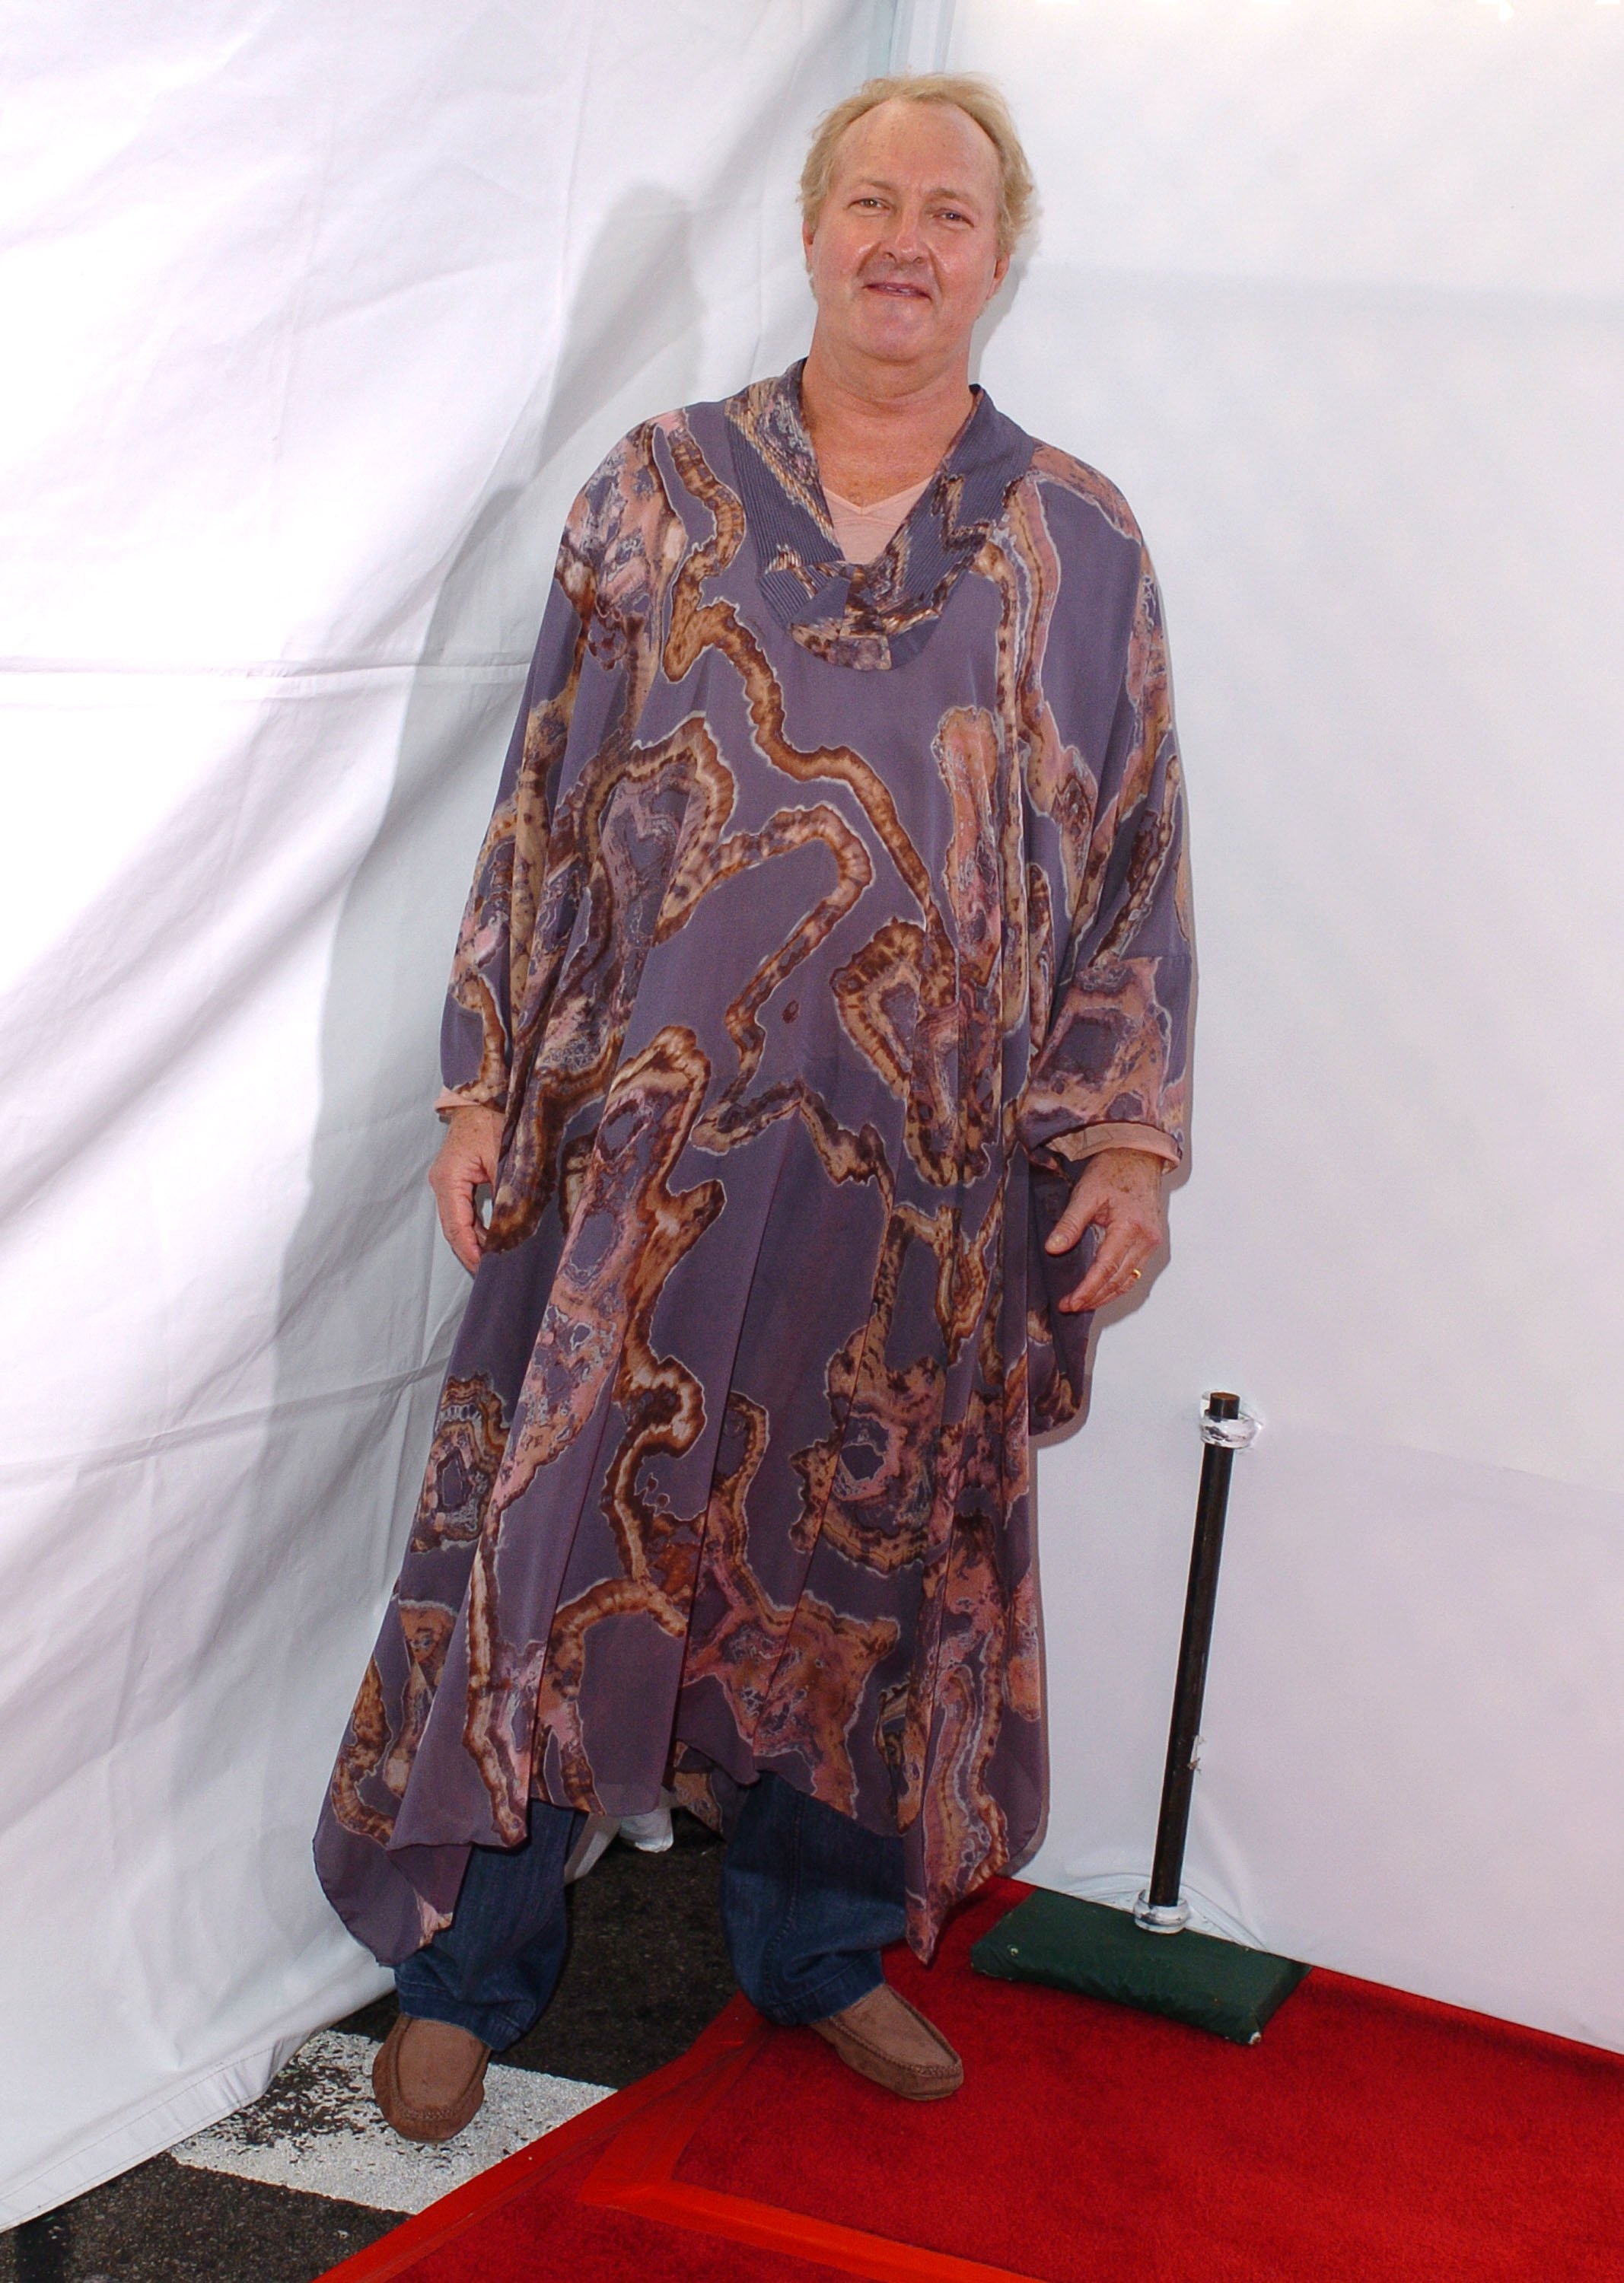 Randy Quaid attend "Monster-In-Law" Los Angeles Premiere in Westwood, California, United States in 2005 | Source: Getty Images